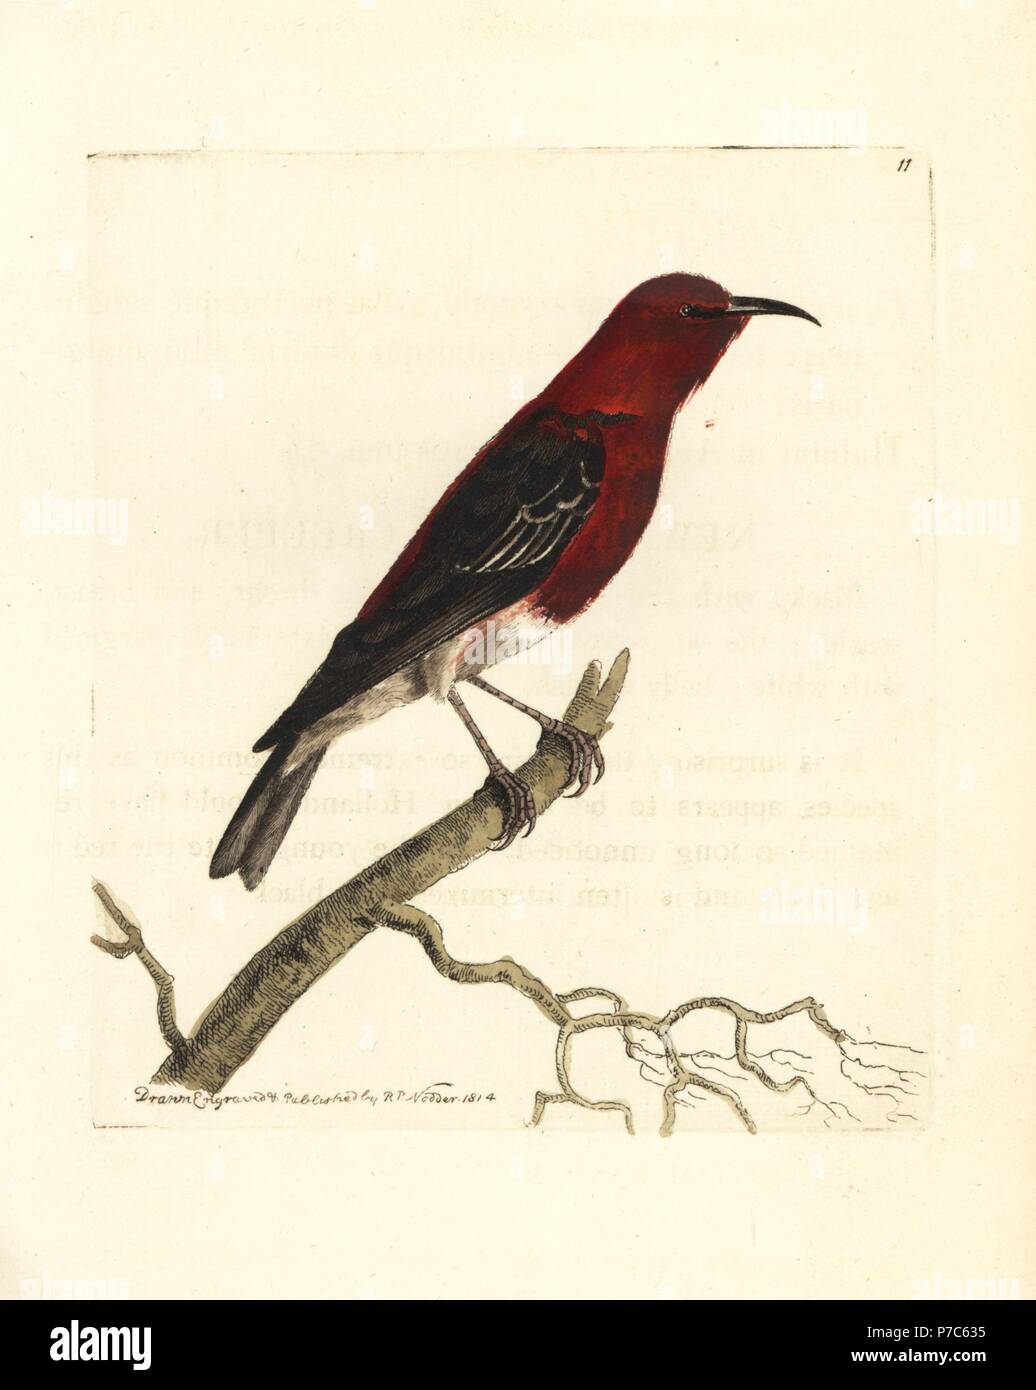 Scarlet honeyeater, Myzomela sanguinolenta (New Holland creeper, Certhia australasiae). Handcoloured copperplate engraving drawn and engraved by Richard Polydore Nodder from William Elford Leach's Zoological Miscellany, McMillan, London, 1814. Stock Photo